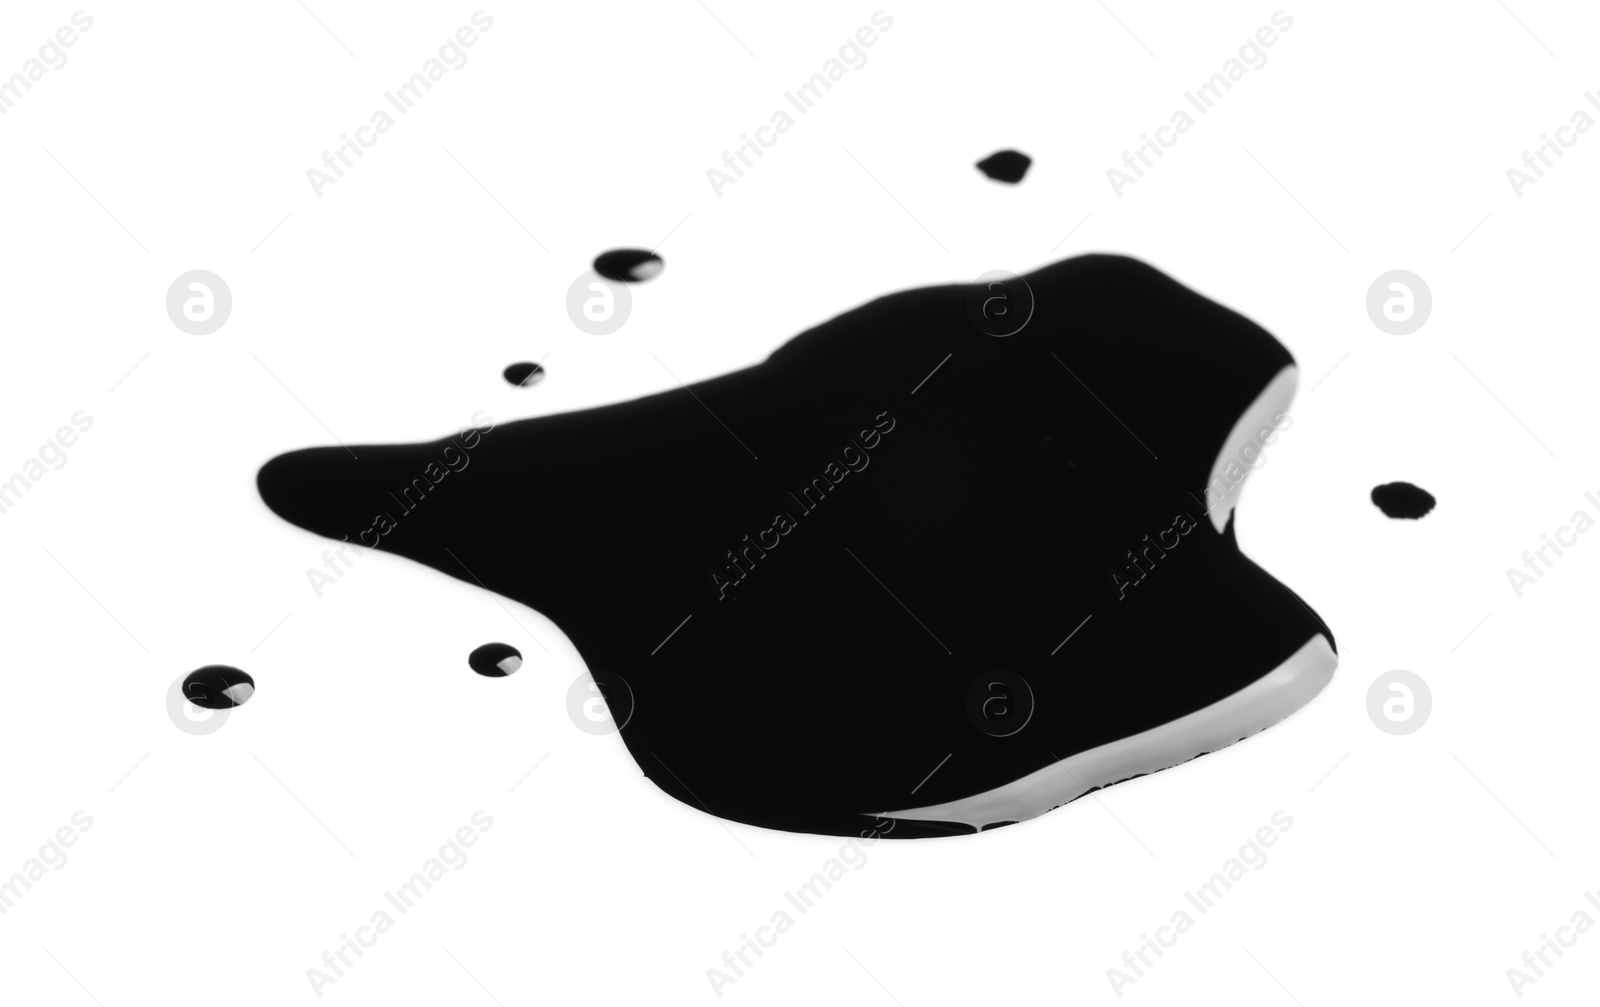 Photo of Blots of black paint on white background